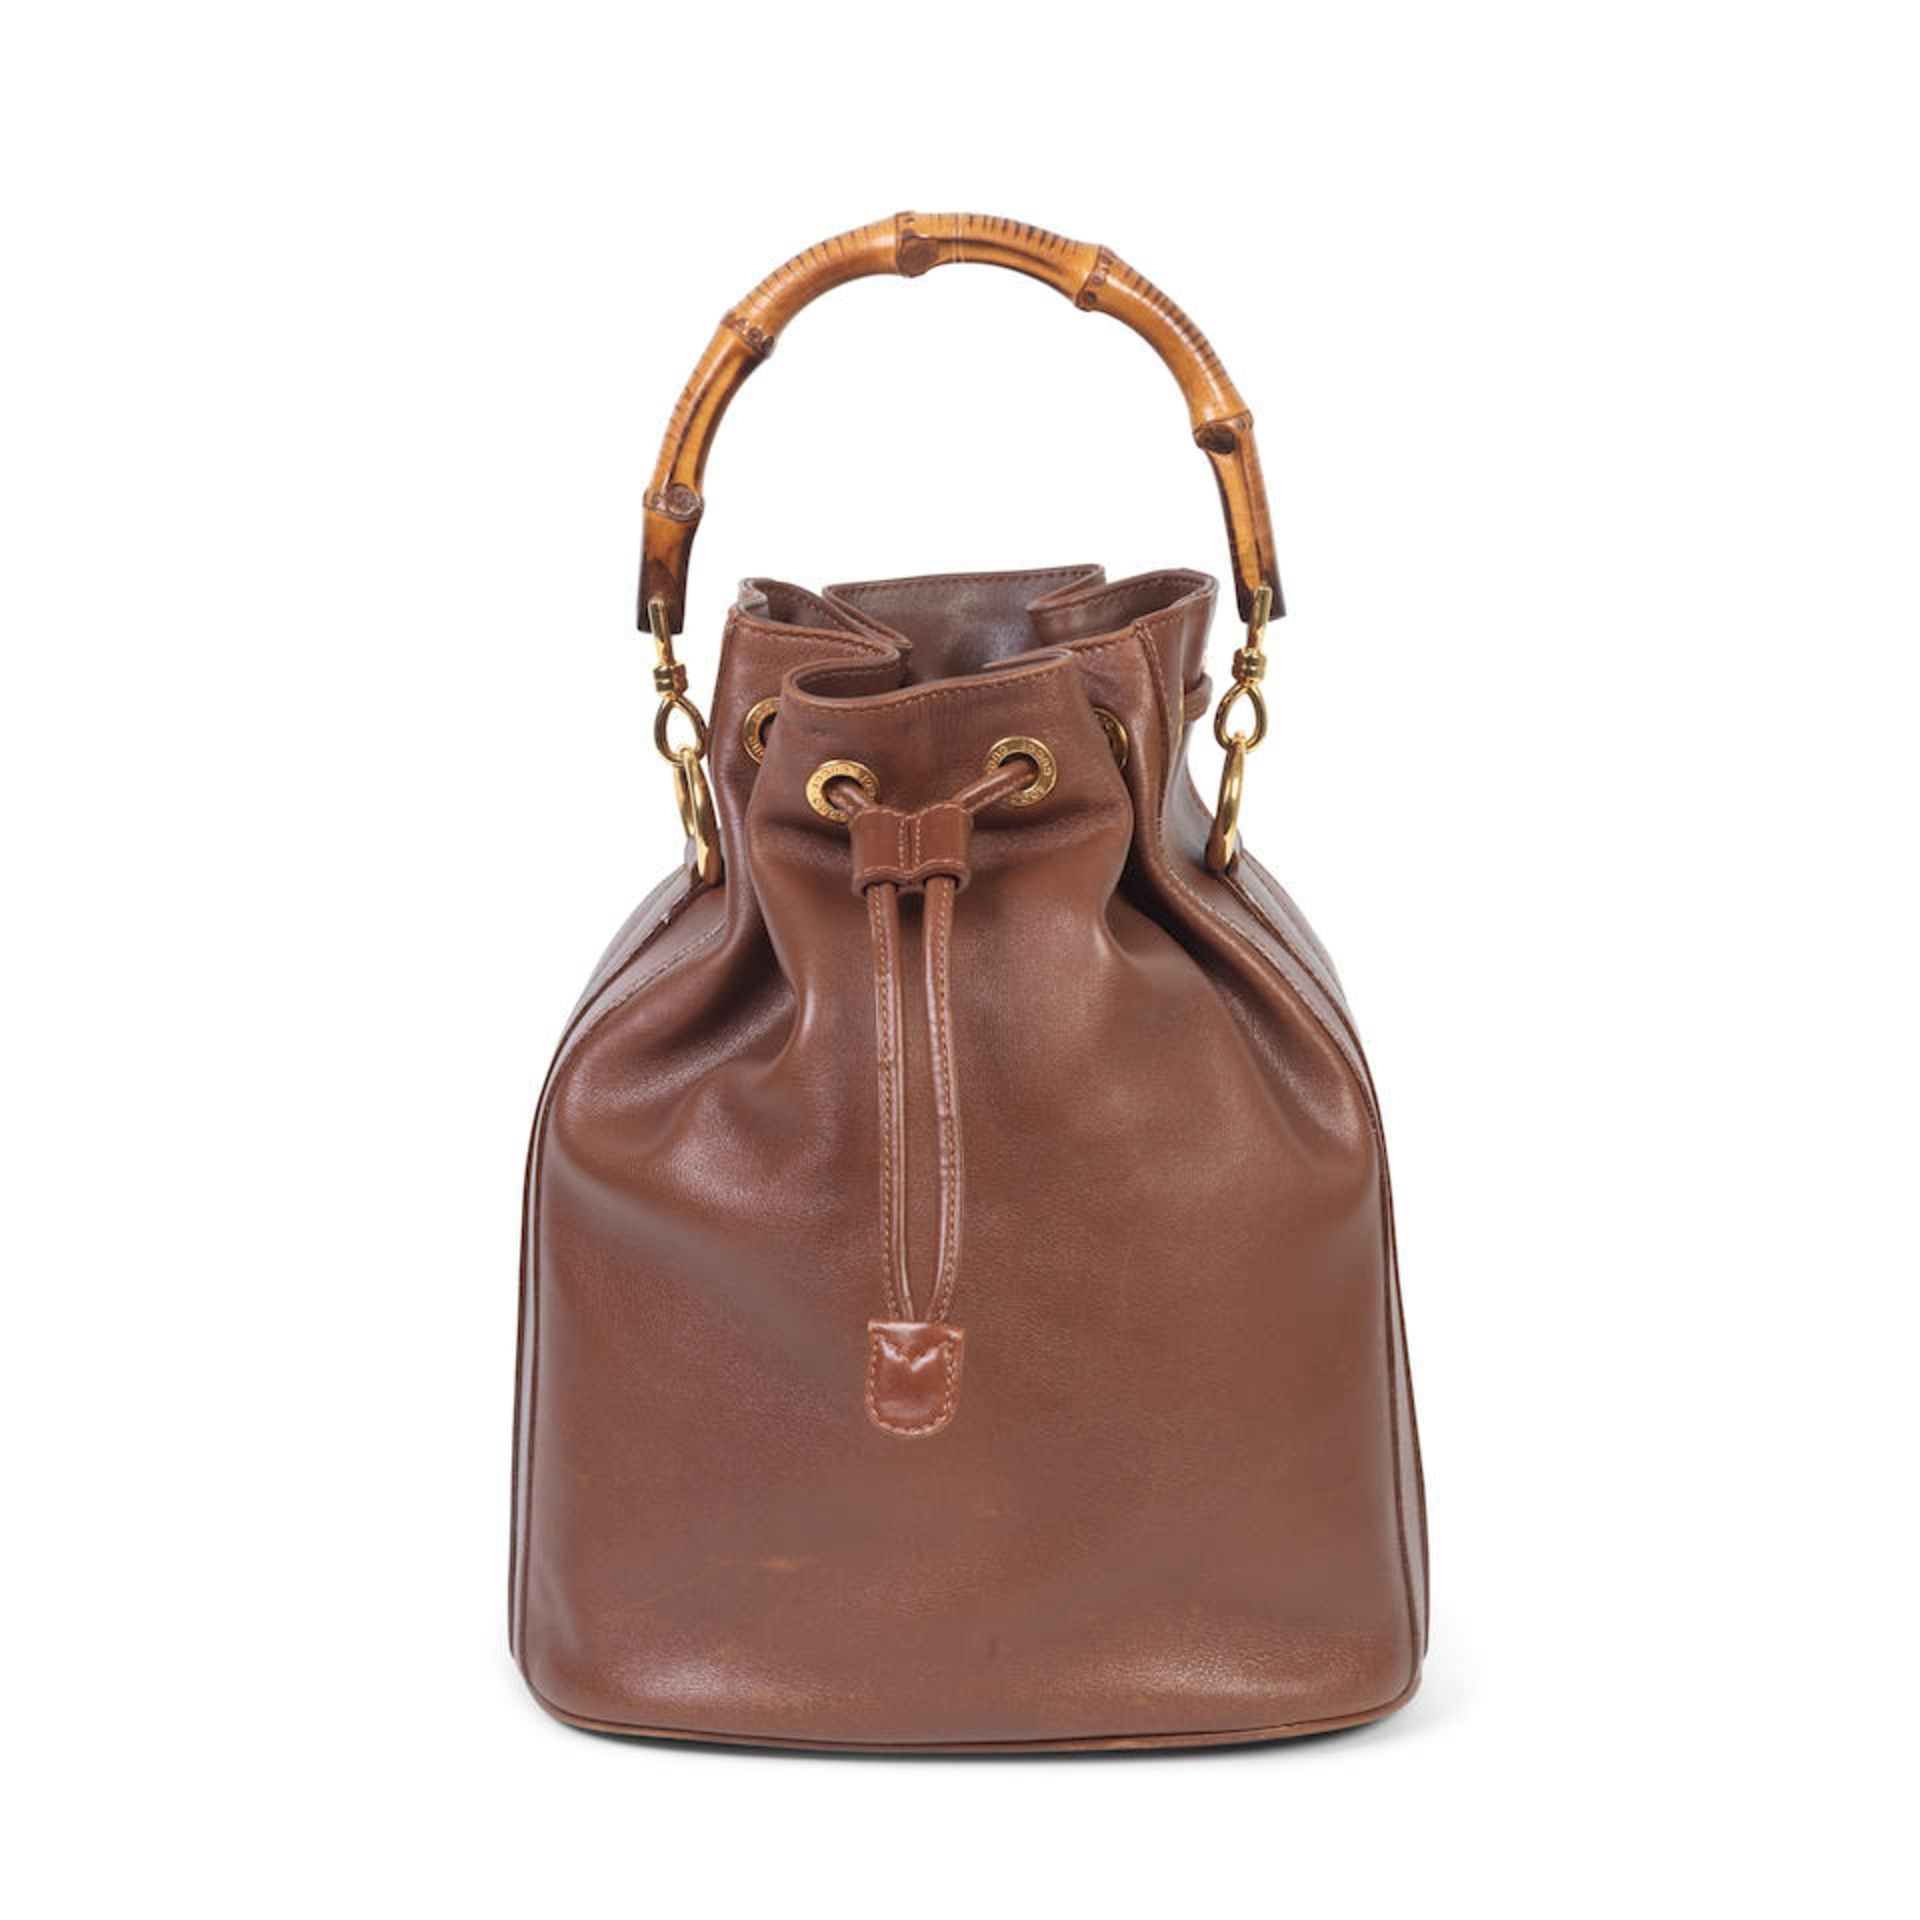 Gucci: a Brown Leather Bamboo Bucket Bag 1990s (includes dust bag)